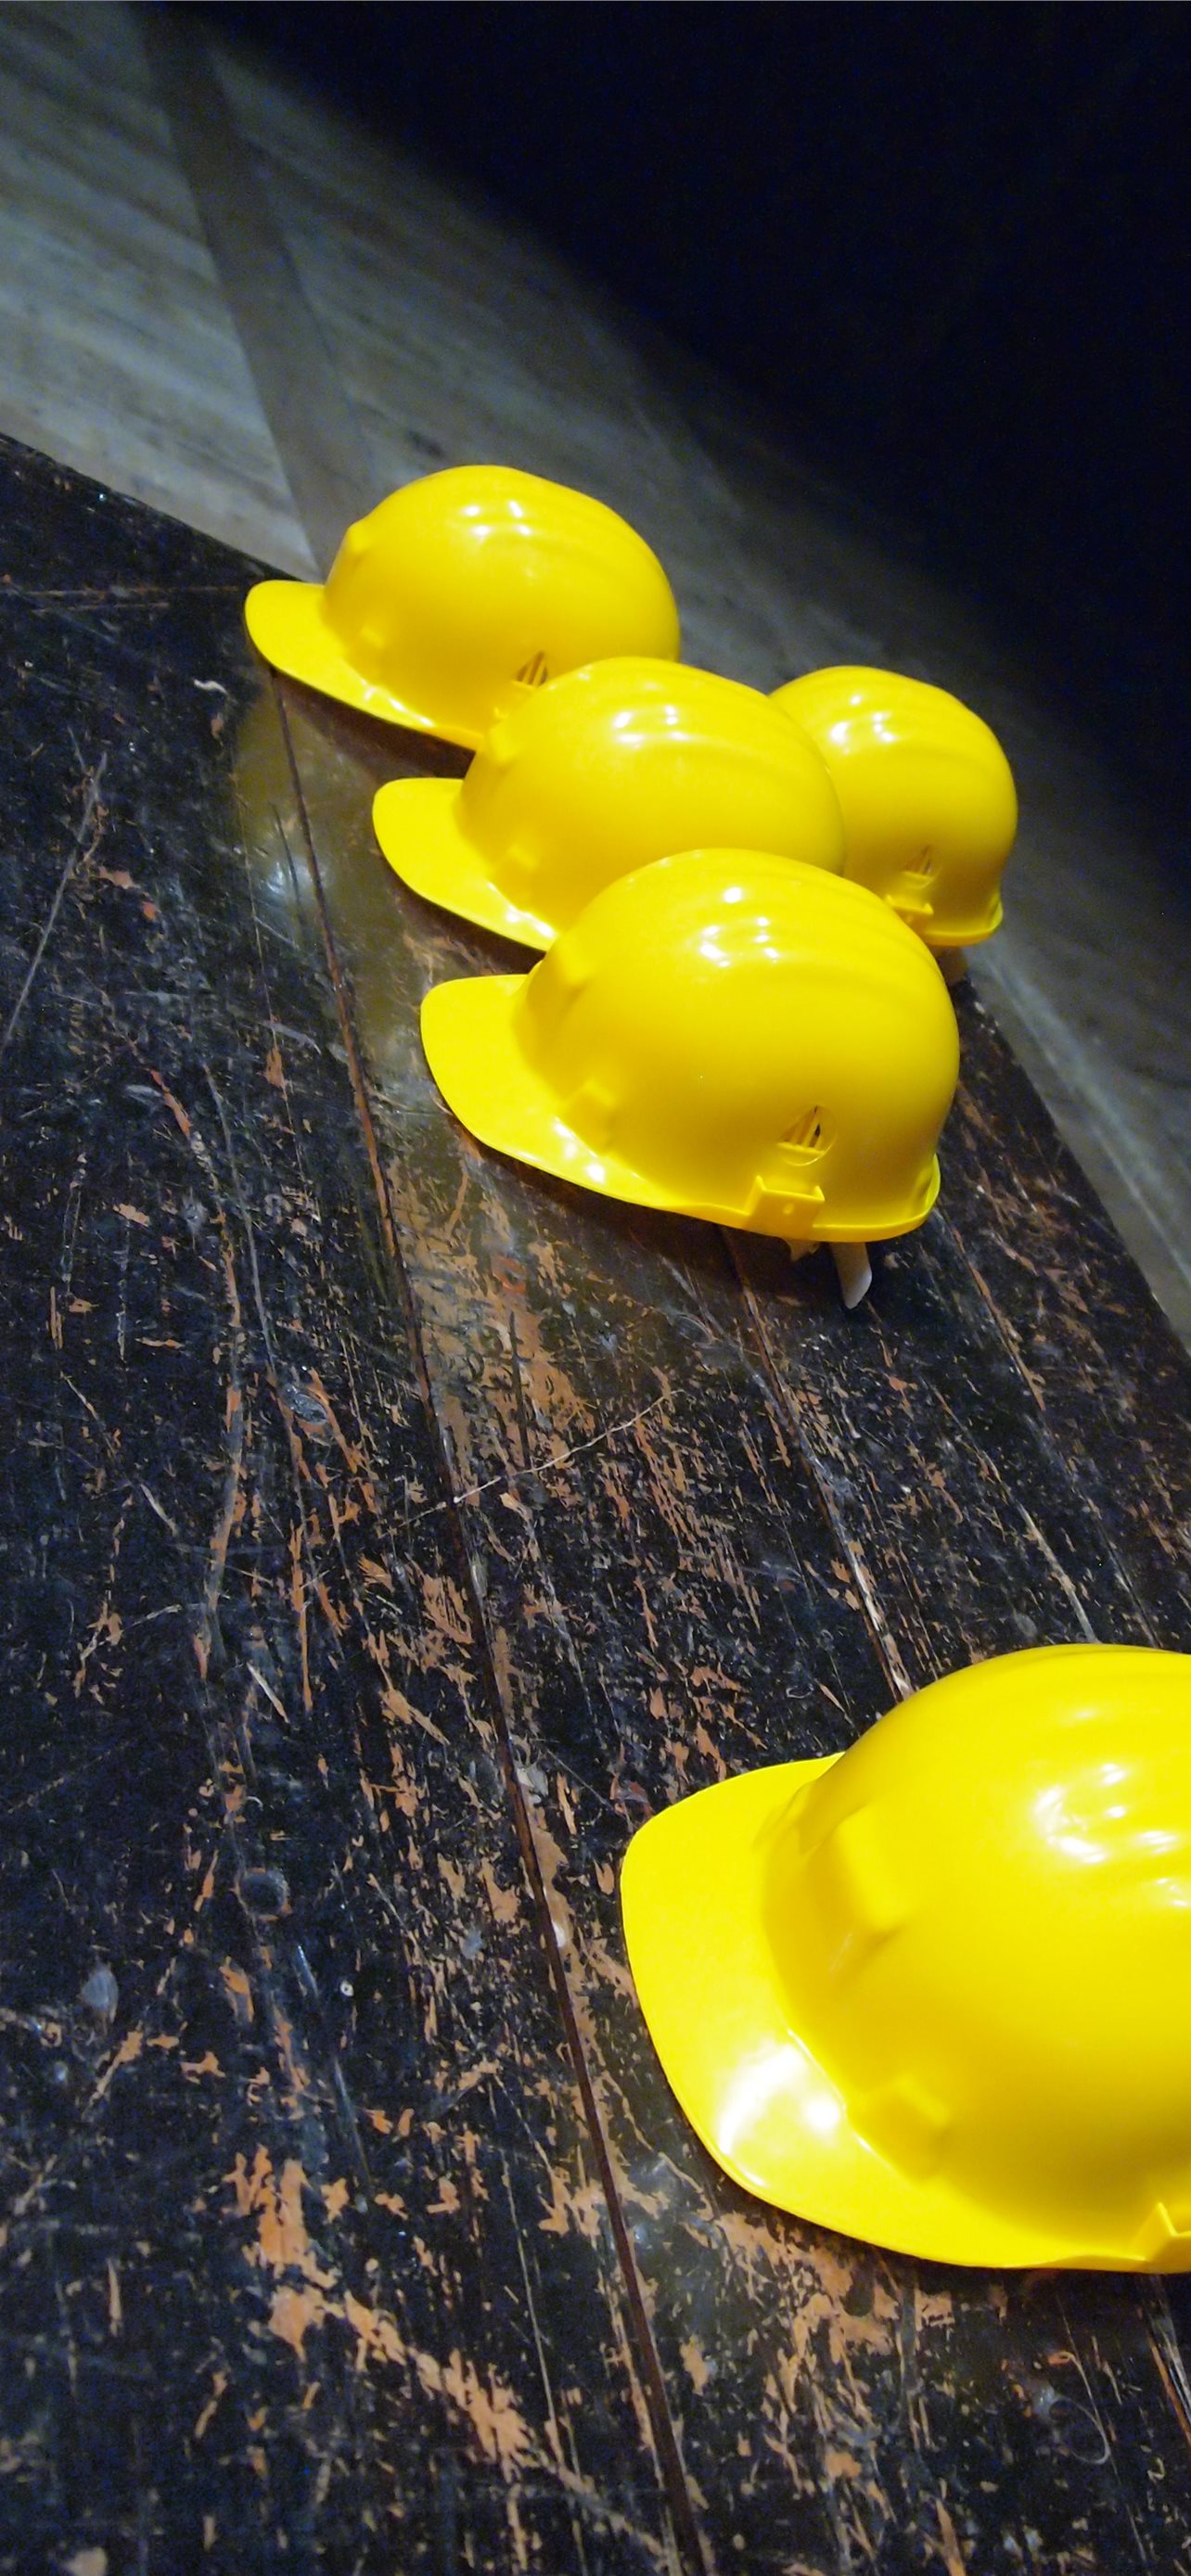 five yellow hard hats on gray surface iPhone wallpaper 